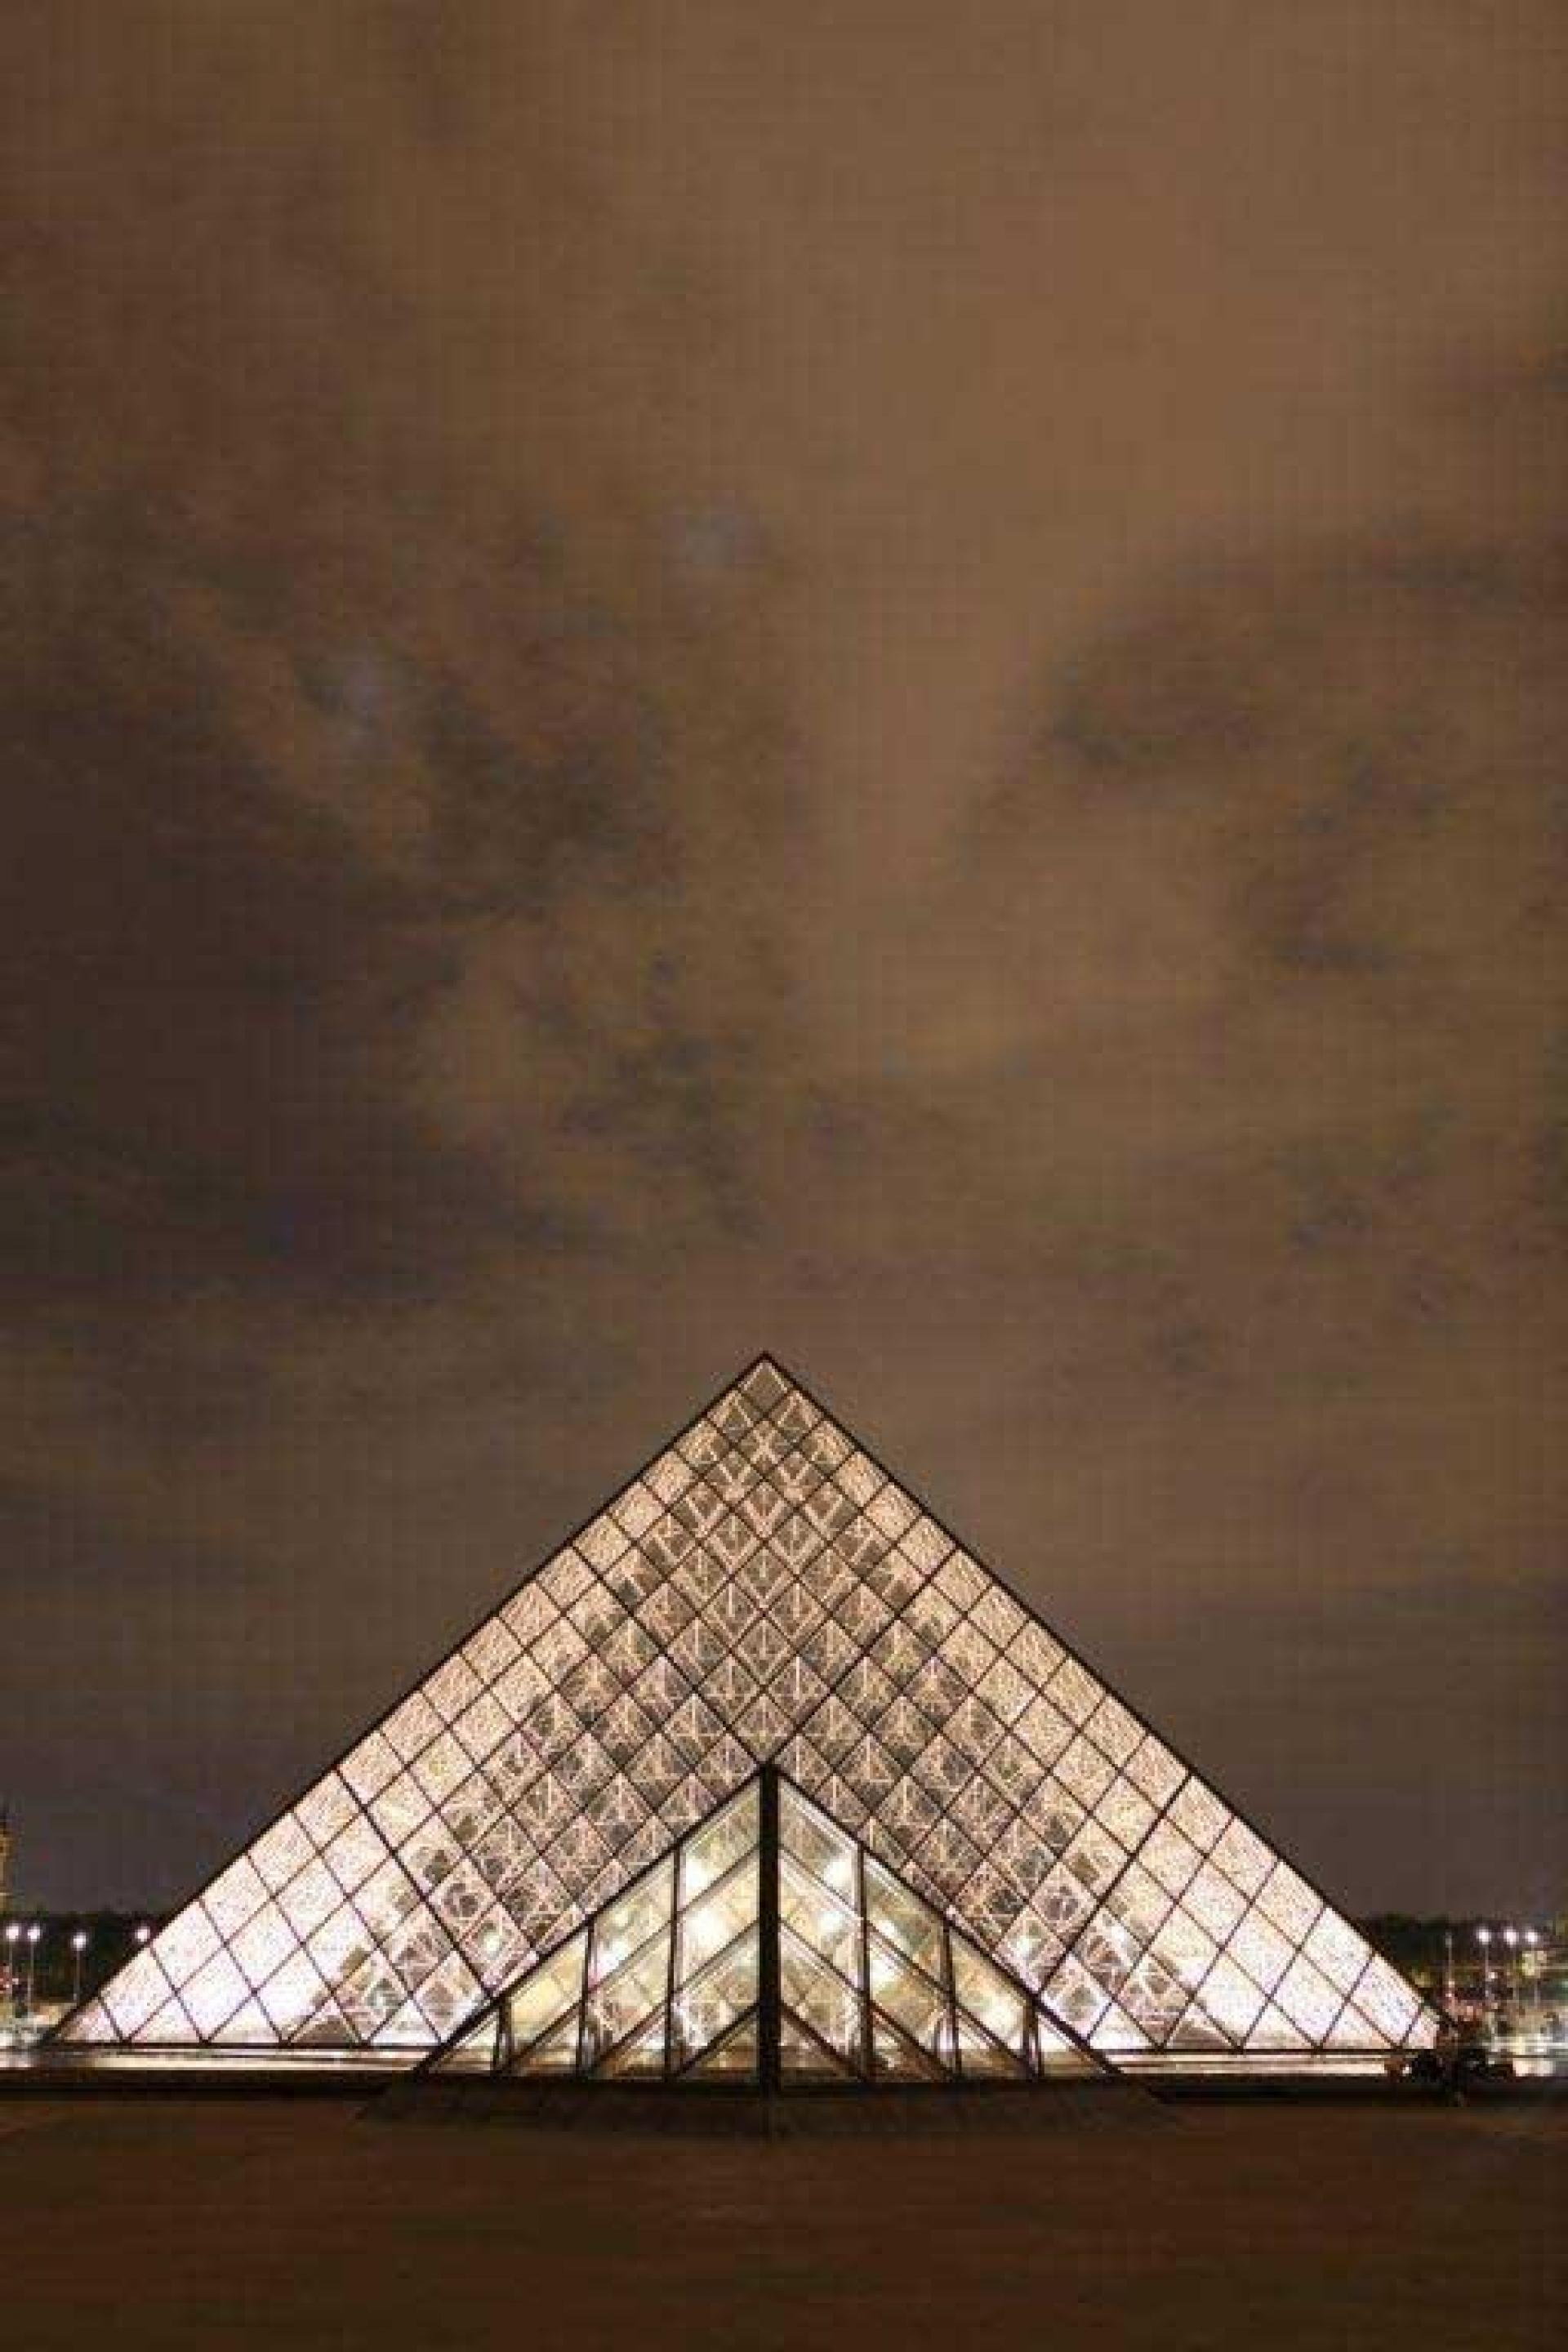 The Louvre pyramid is the main entrance to the Louvre Museum and has become a landmark of the city of Paris. | Photo by Steven Powell